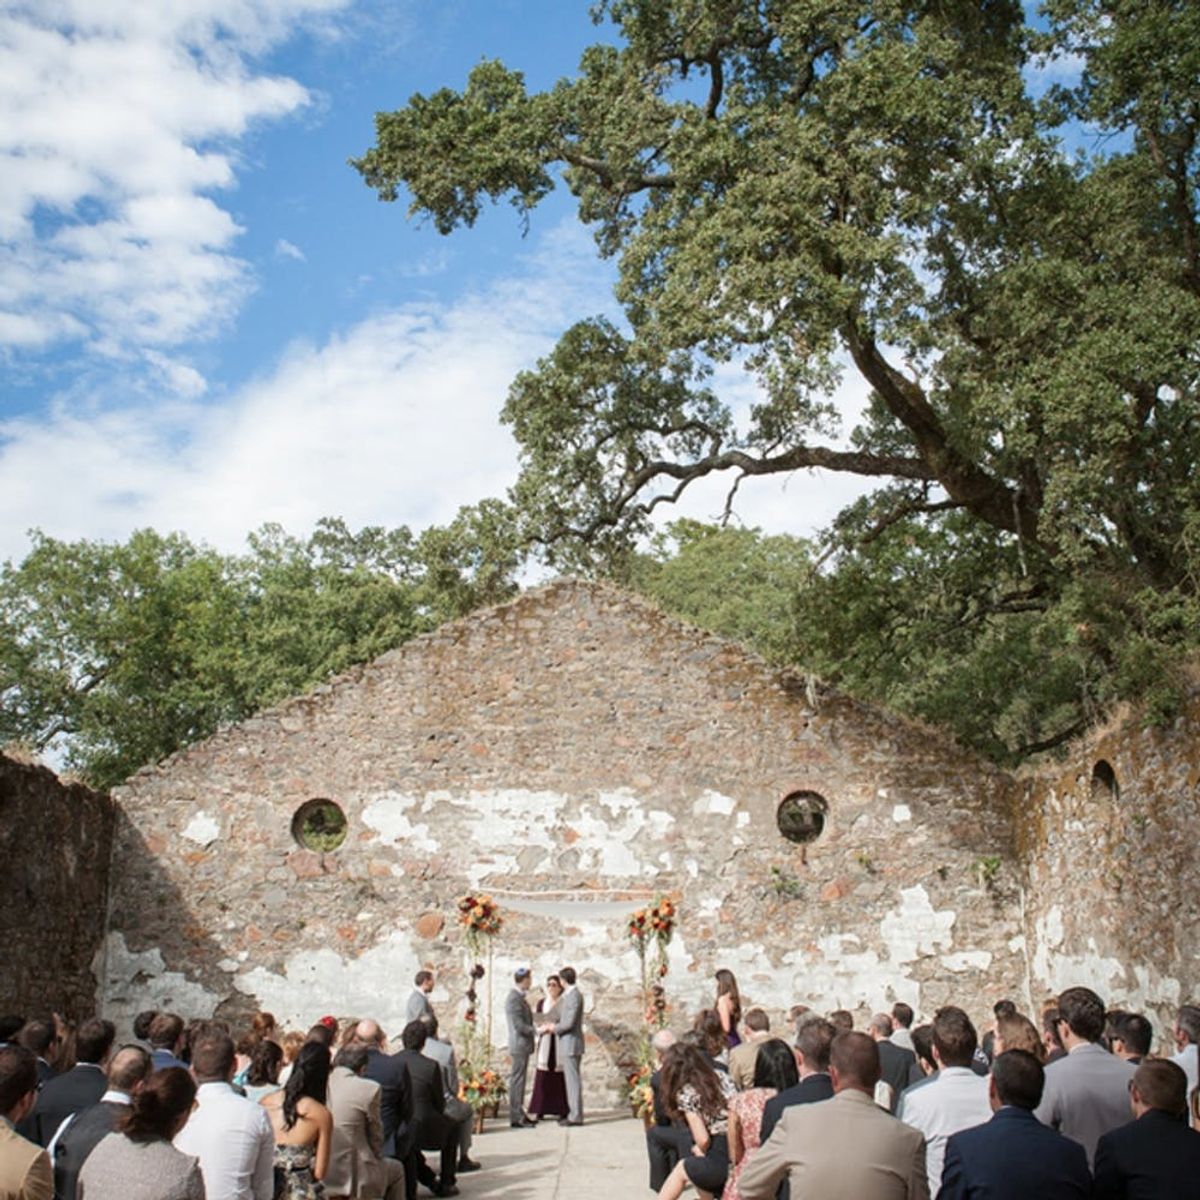 Dream Wedding Venues You Can Get for… $20,000